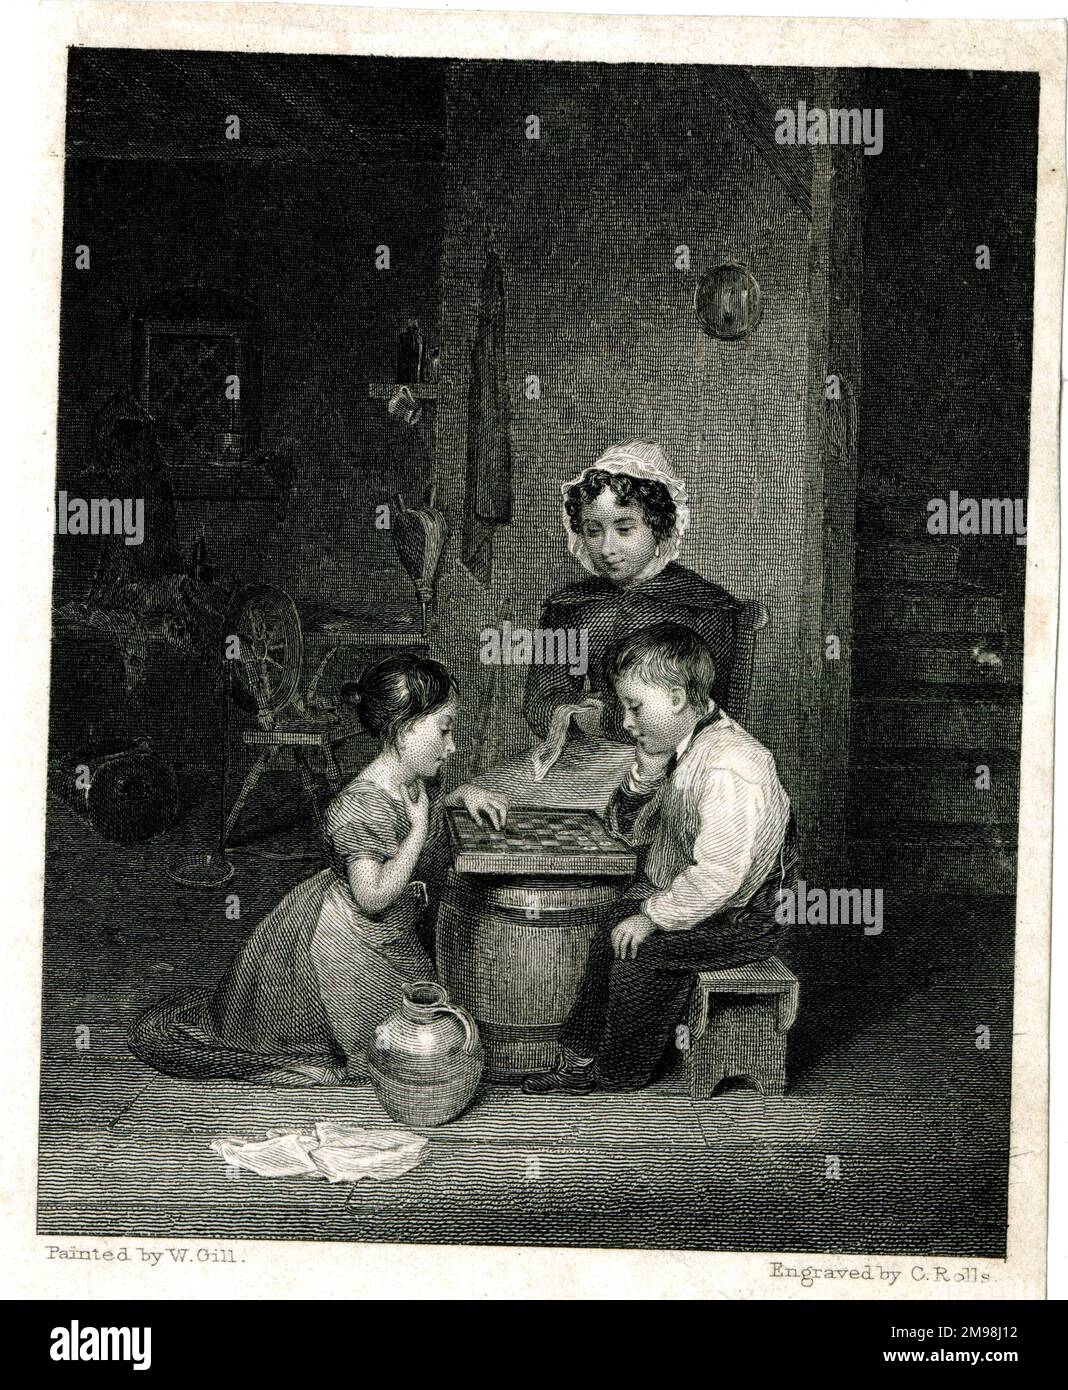 The Orphans - two children play draughts, watched by a woman. Stock Photo